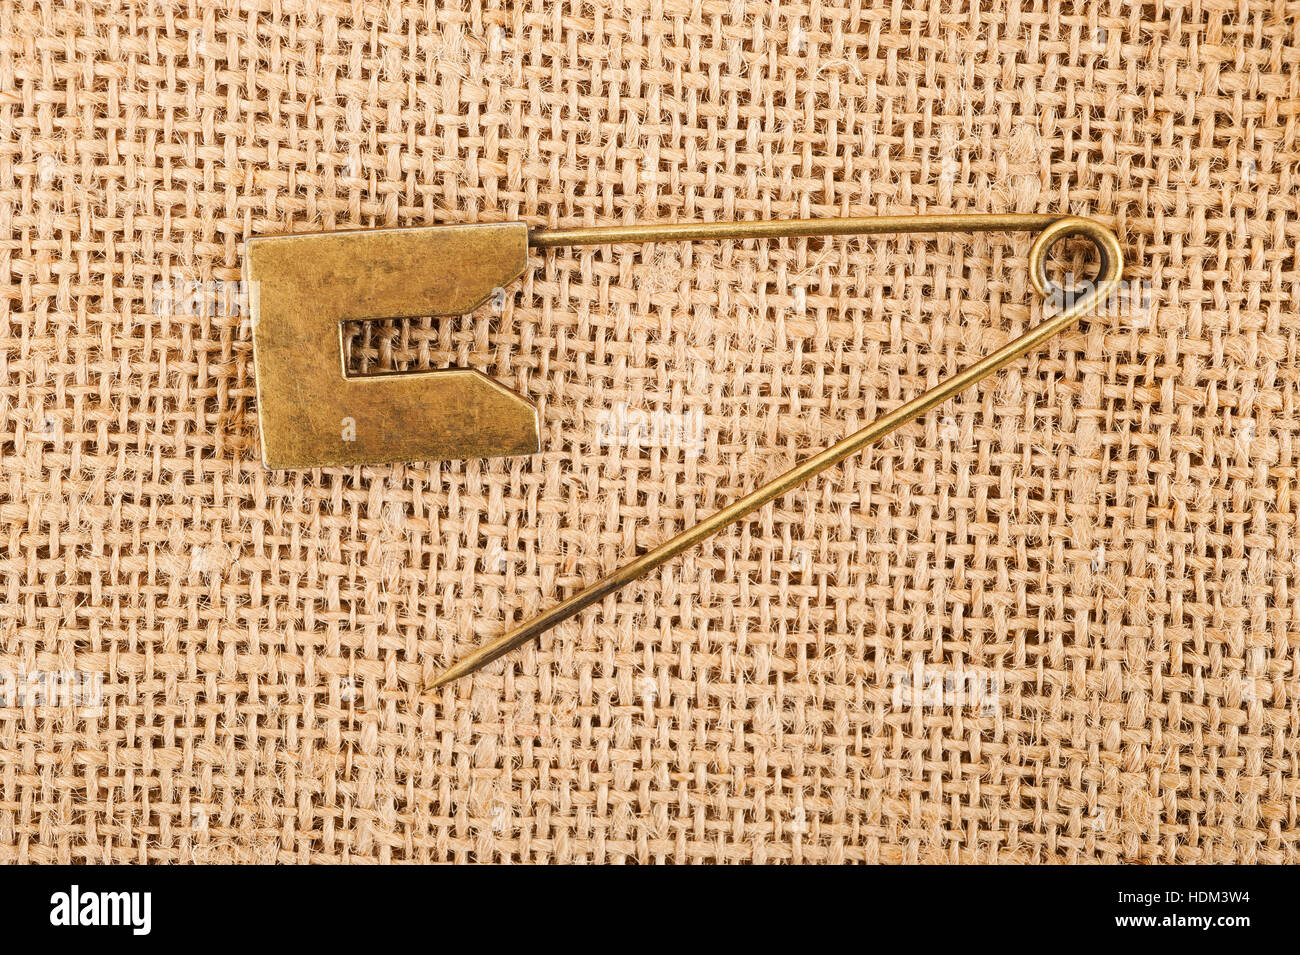 Vintage brooch or safety pin on jute background, Stock Photo